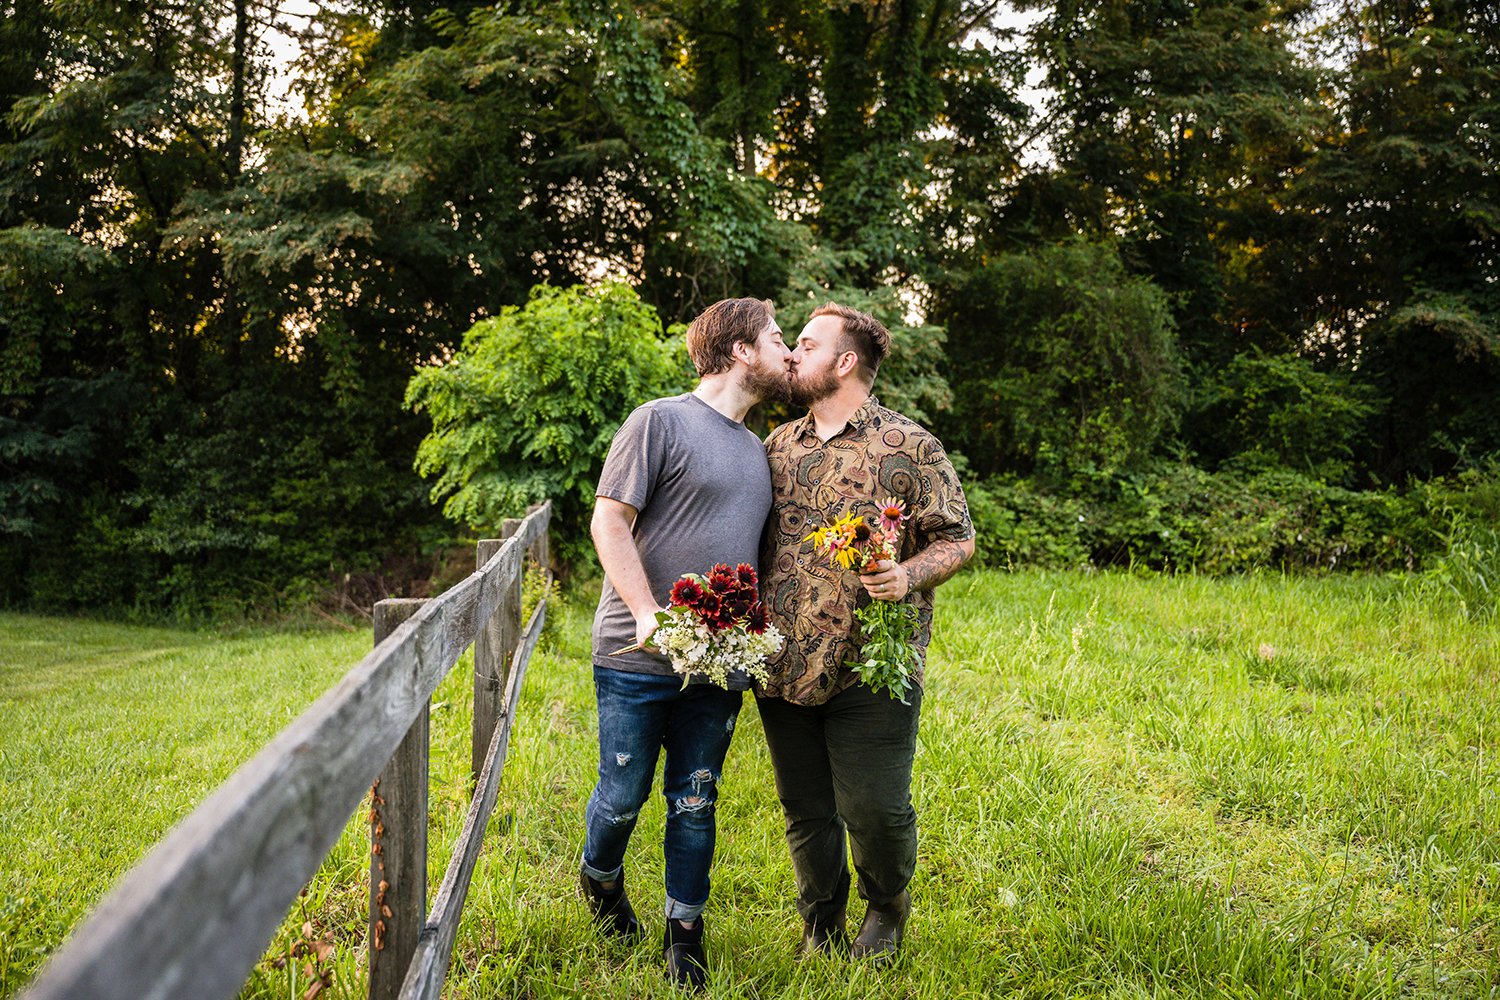 The owners of Fae Cottage Flower hold flowers plucked from their garden and kiss one another during their adventure session in Roanoke, Virginia.